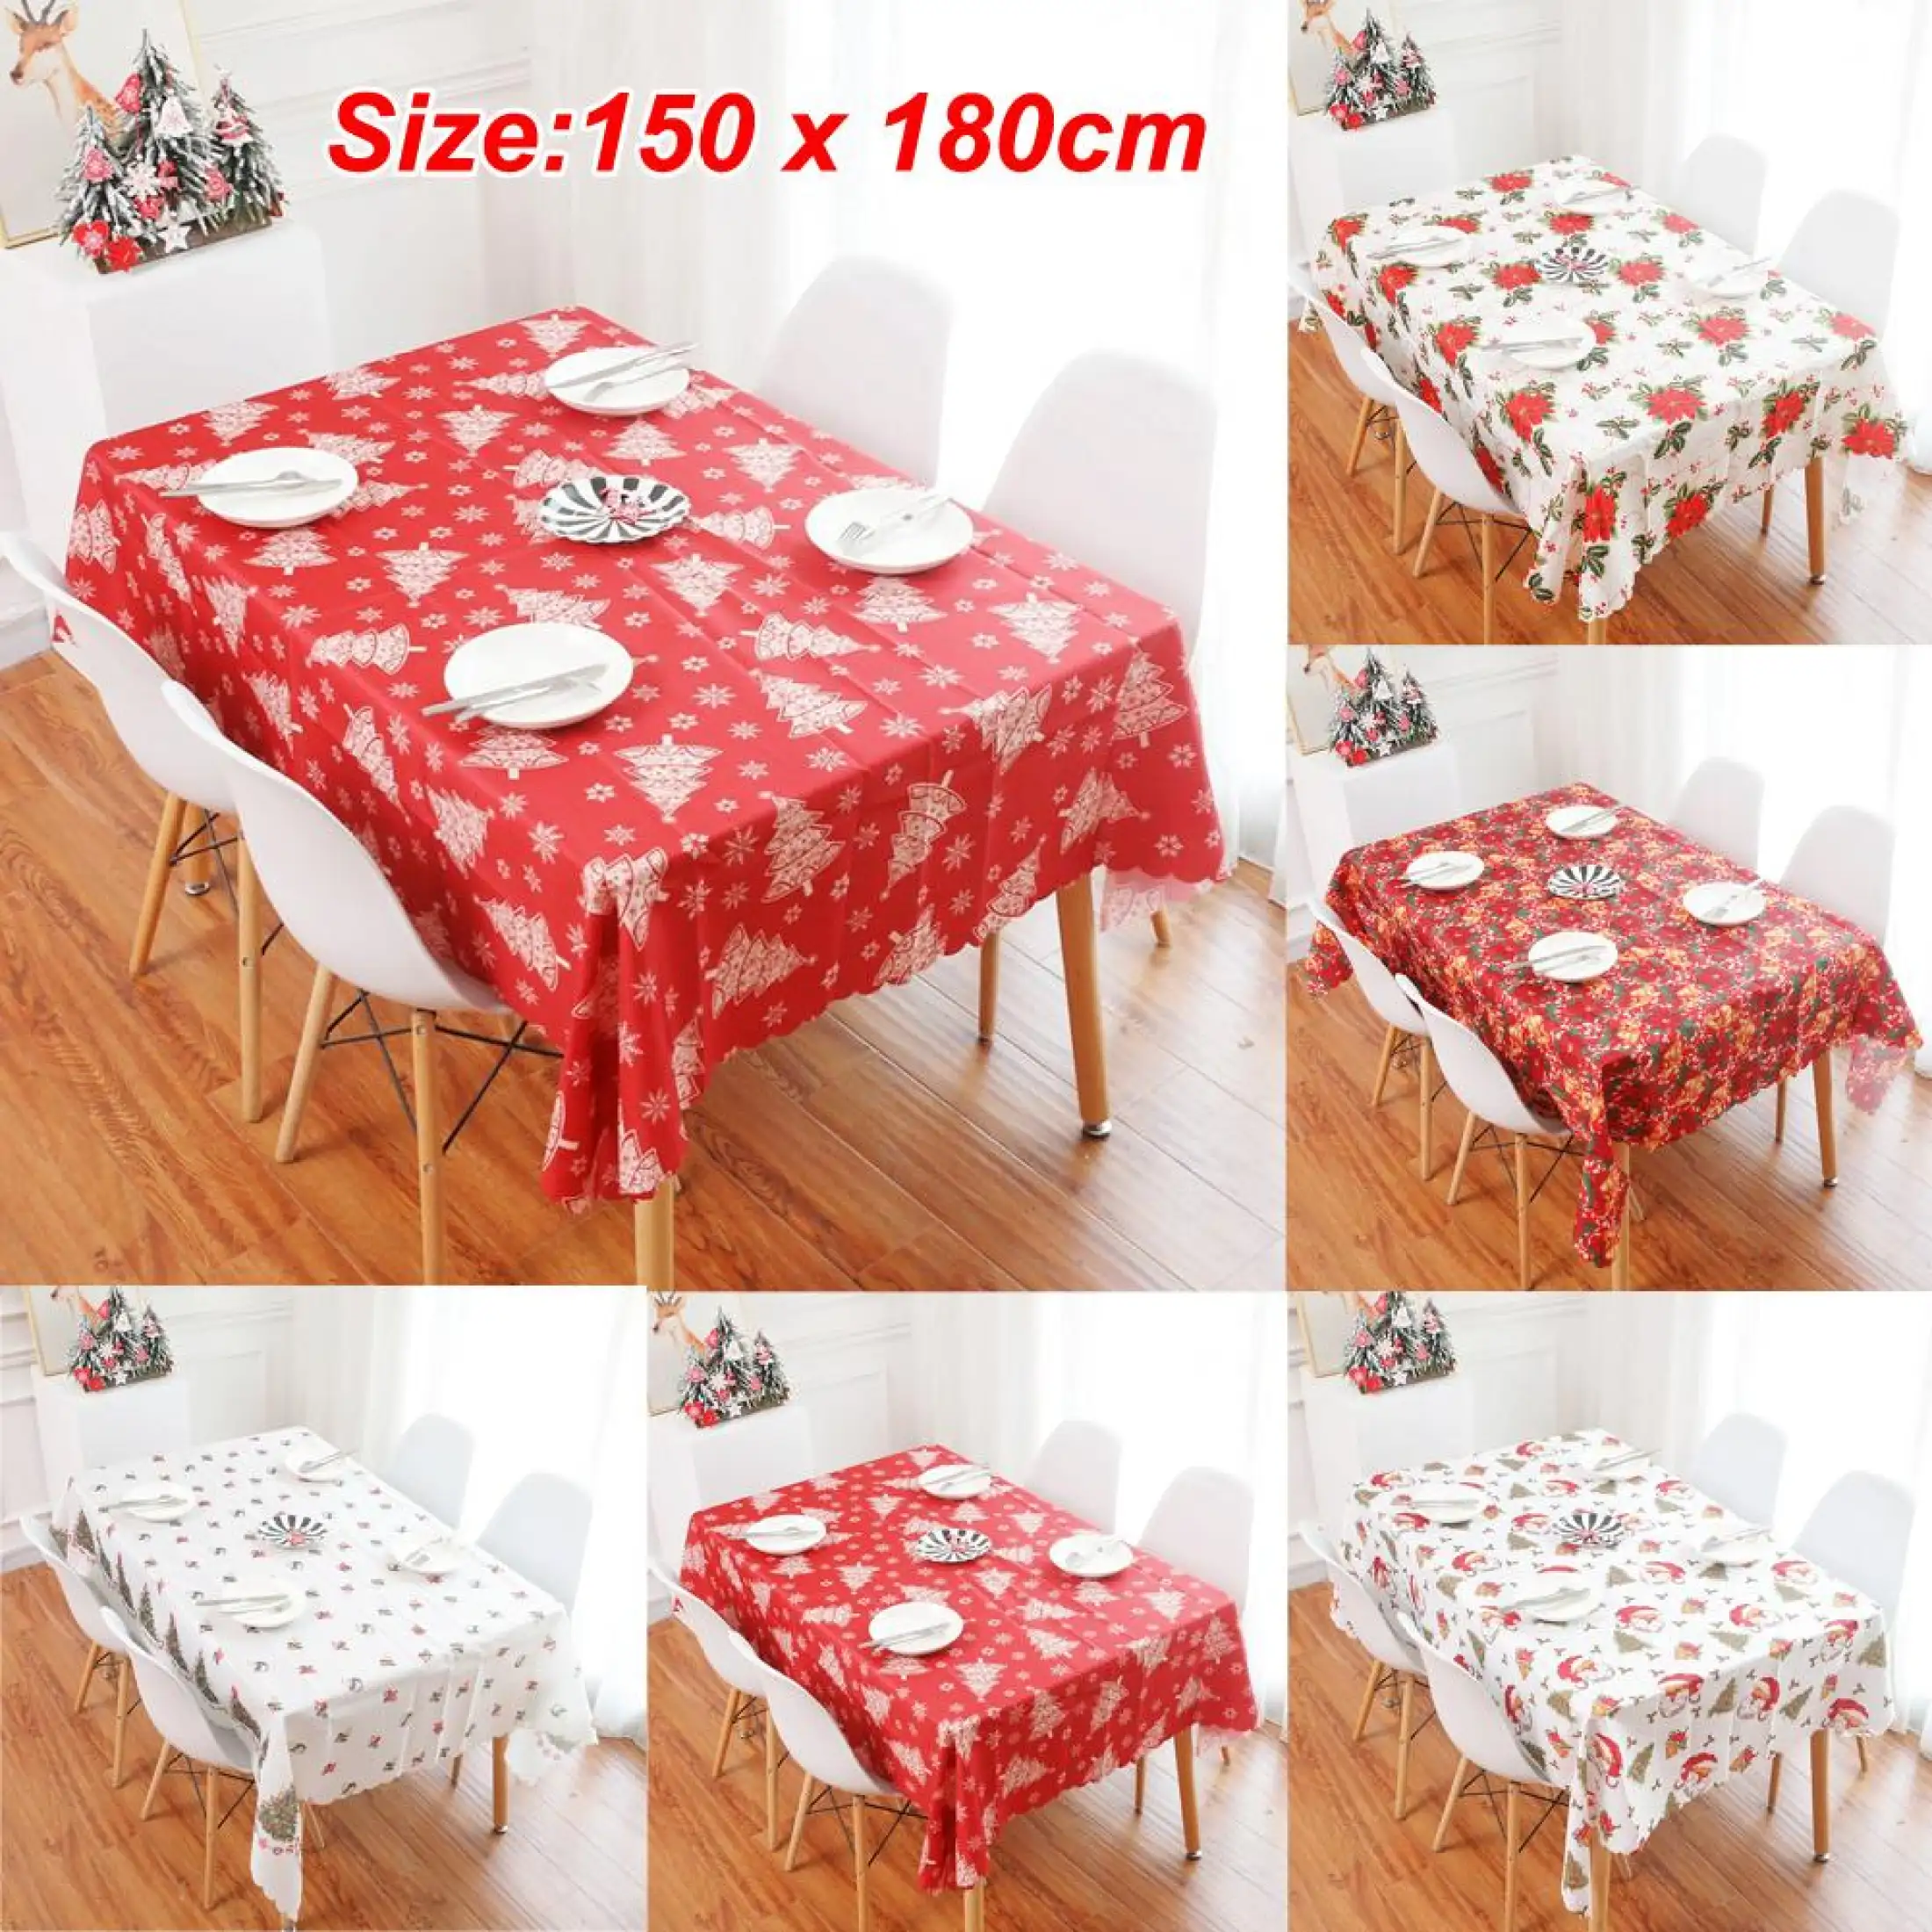 Christmas Bell Tablecloth Print Table Cover Xmas Party Home Dinner Decor Gift